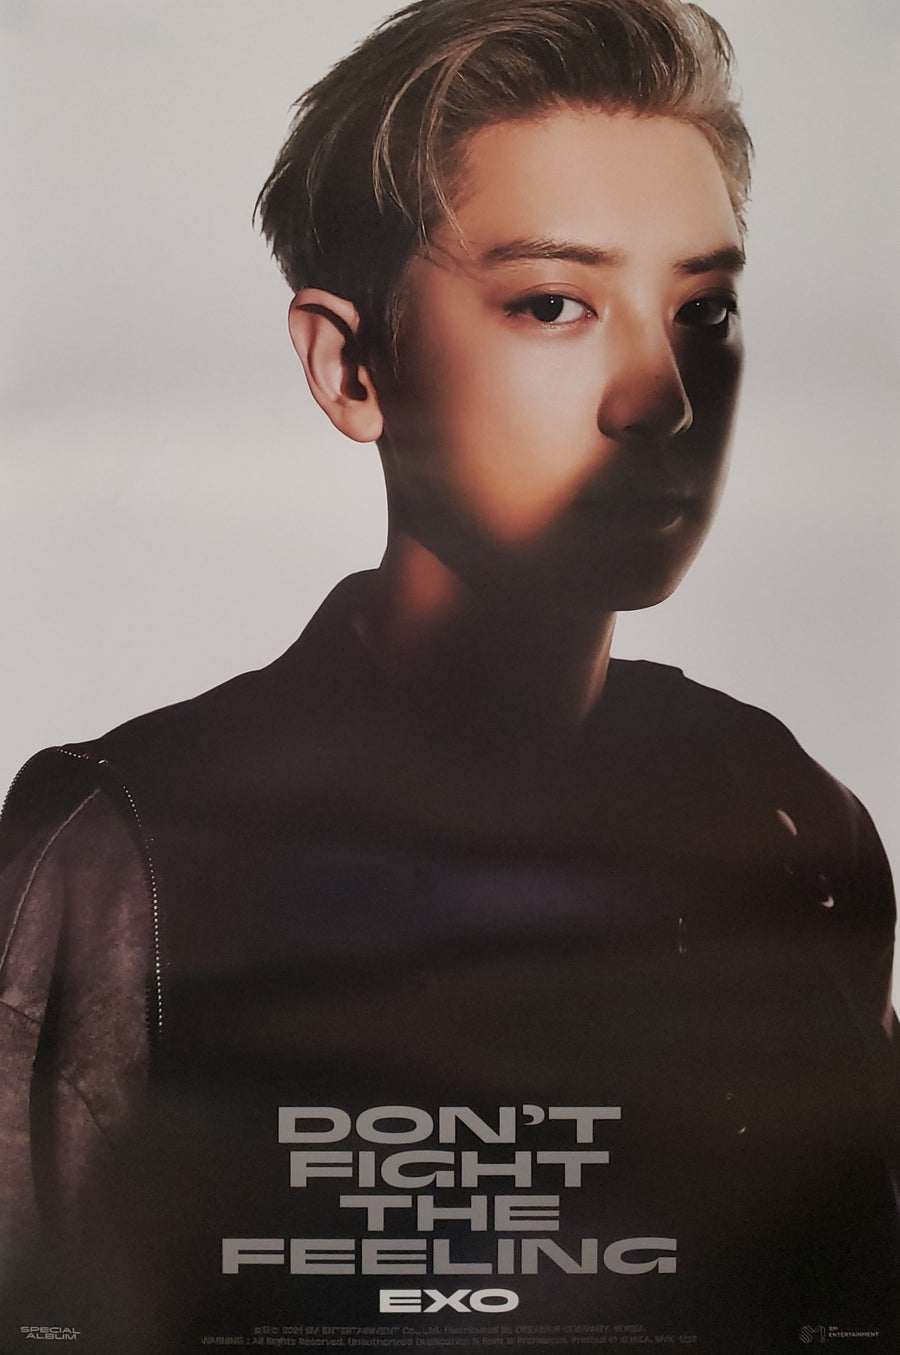 EXO SPECIAL ALBUM DON'T FIGHT THE FEELING (JEWEL CASE VER) Official Poster - Chanyeol Version